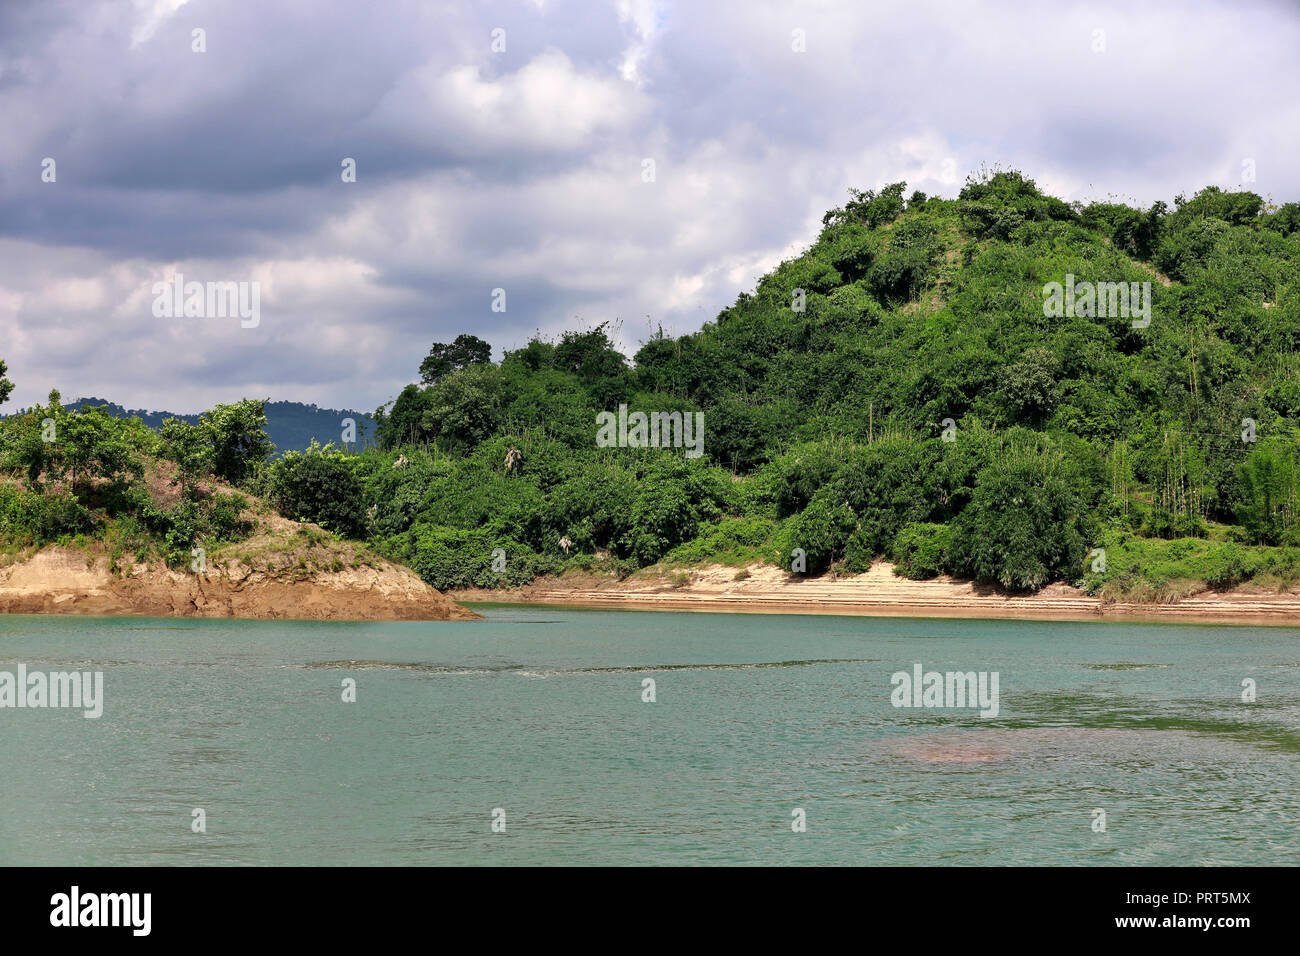 Sylhet, Bangladesh - September 23, 2018: Lalakhal,which is another top tourist attraction in Jaintapur Upazilla, is covered with hills, natural forest Stock Photo